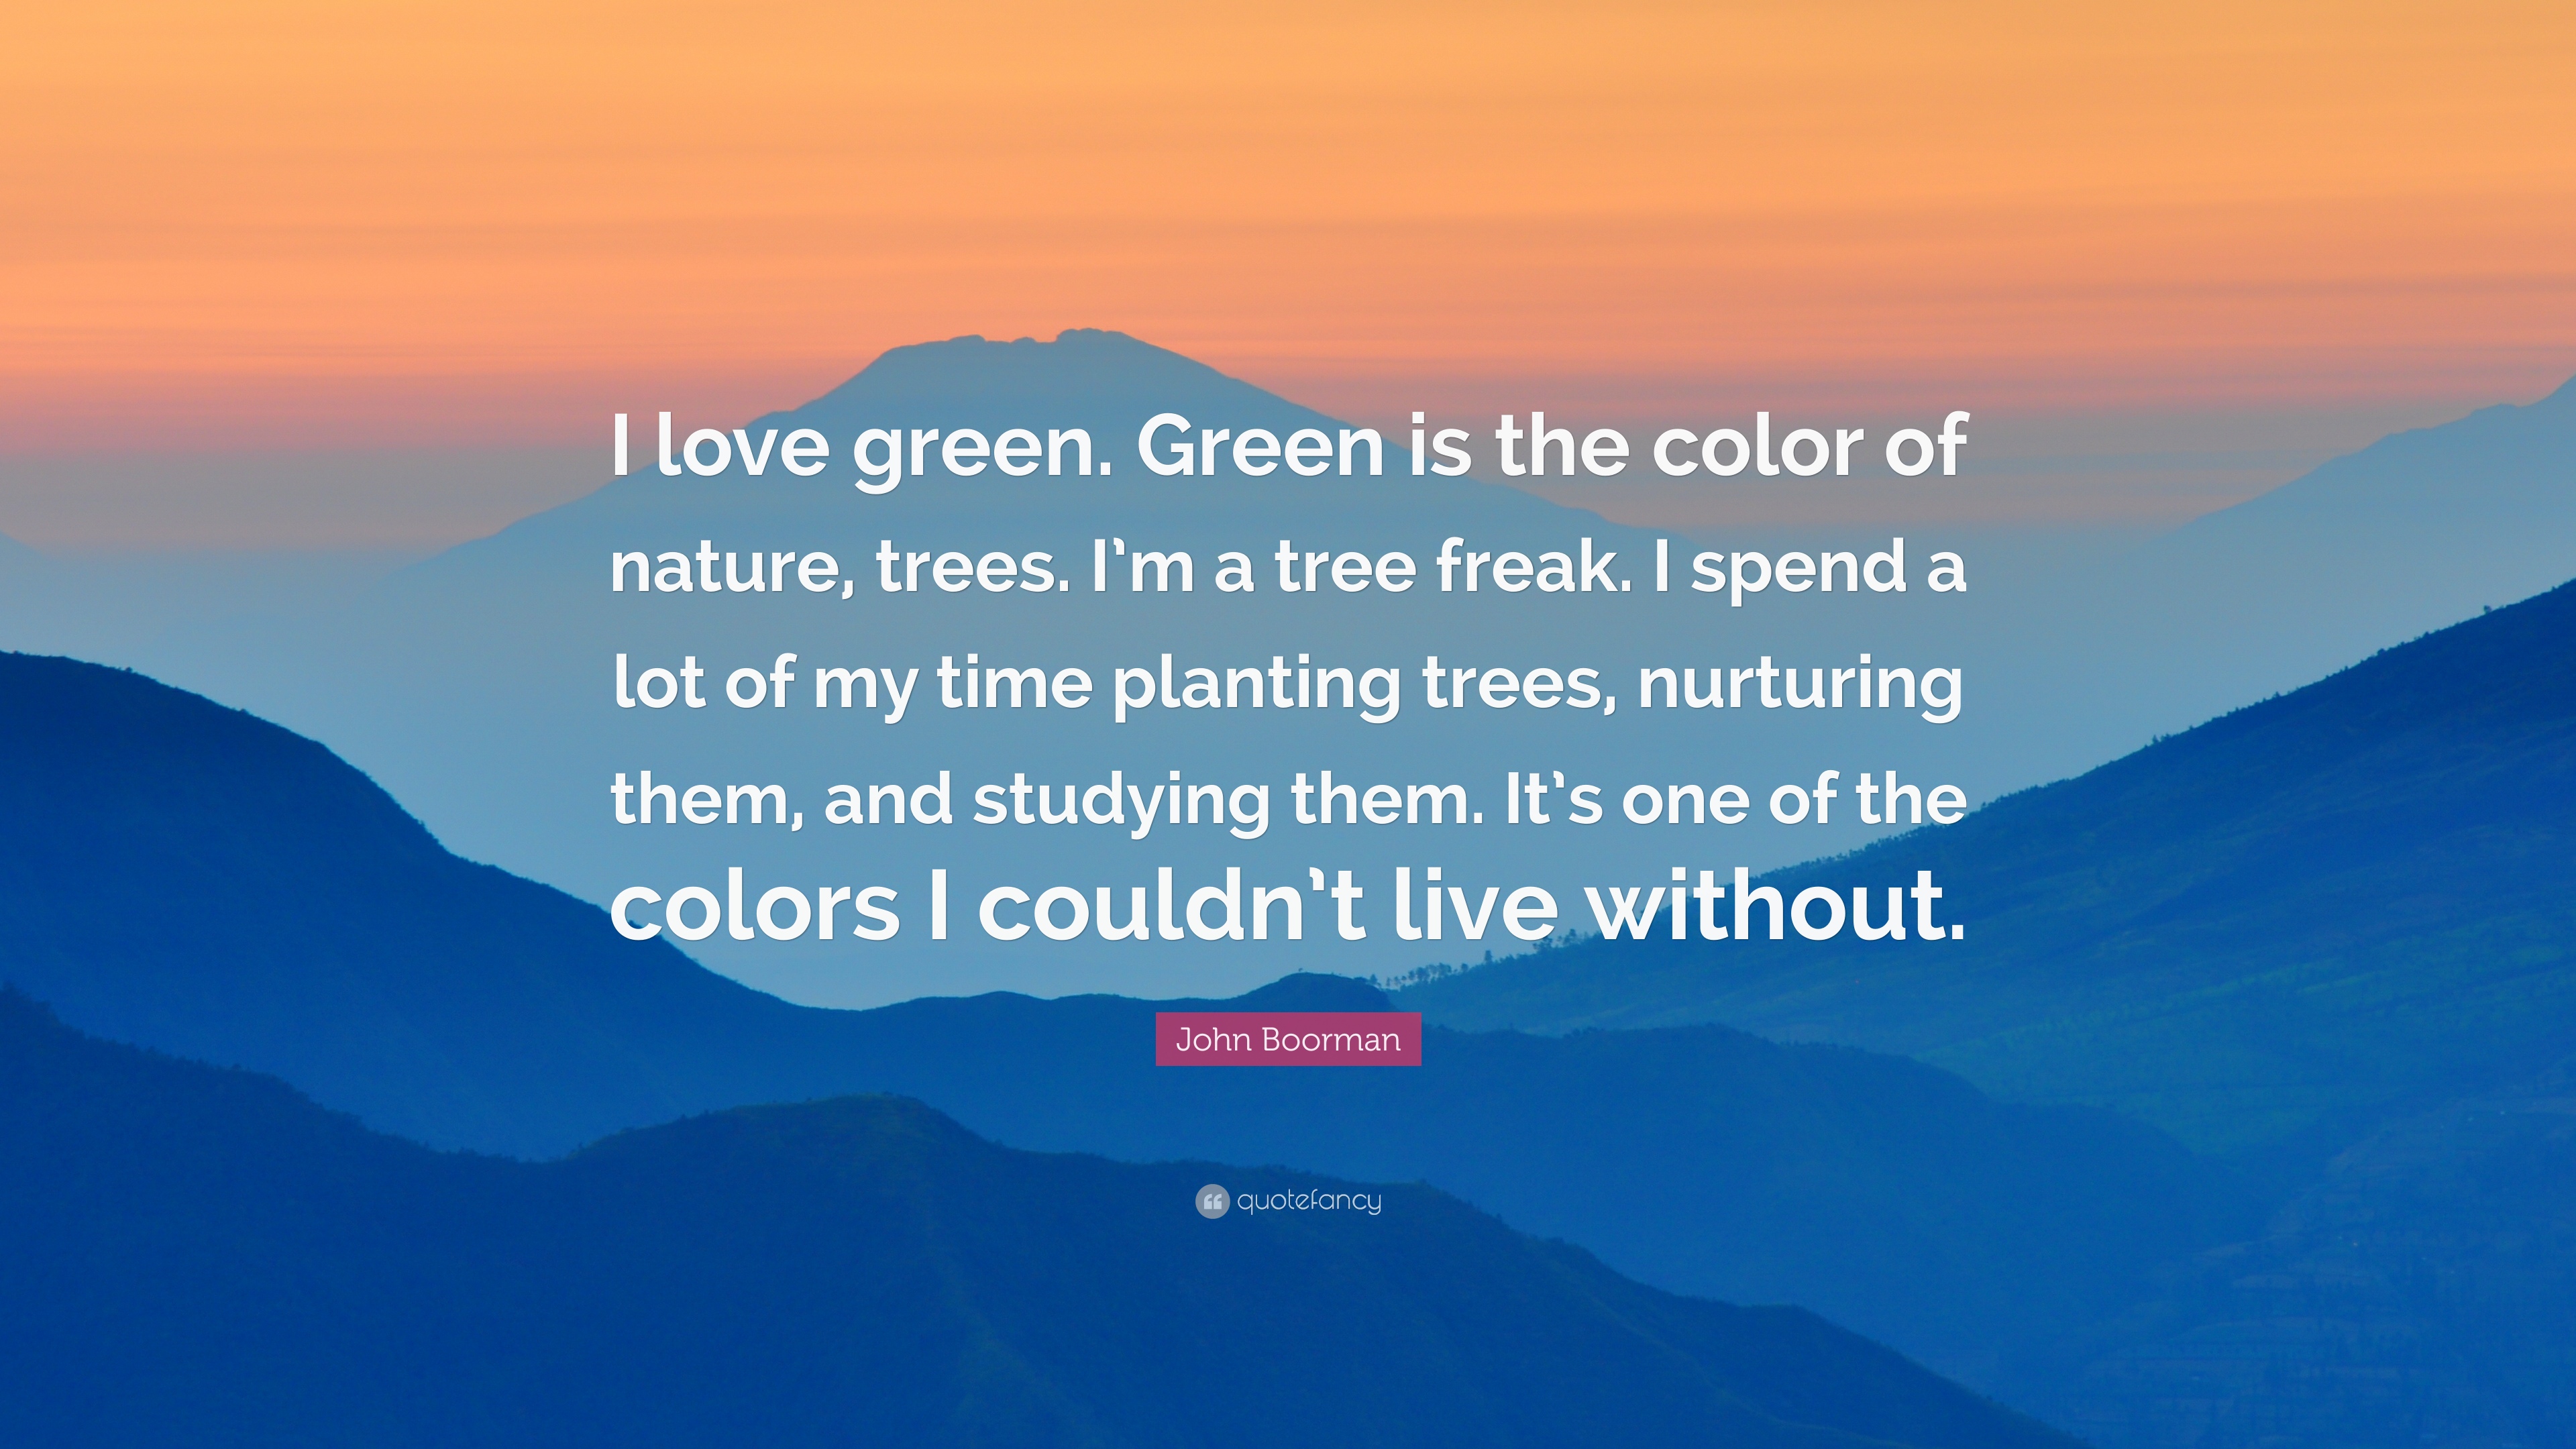 John Boorman Quote: “I love green. Green is the color of nature ...